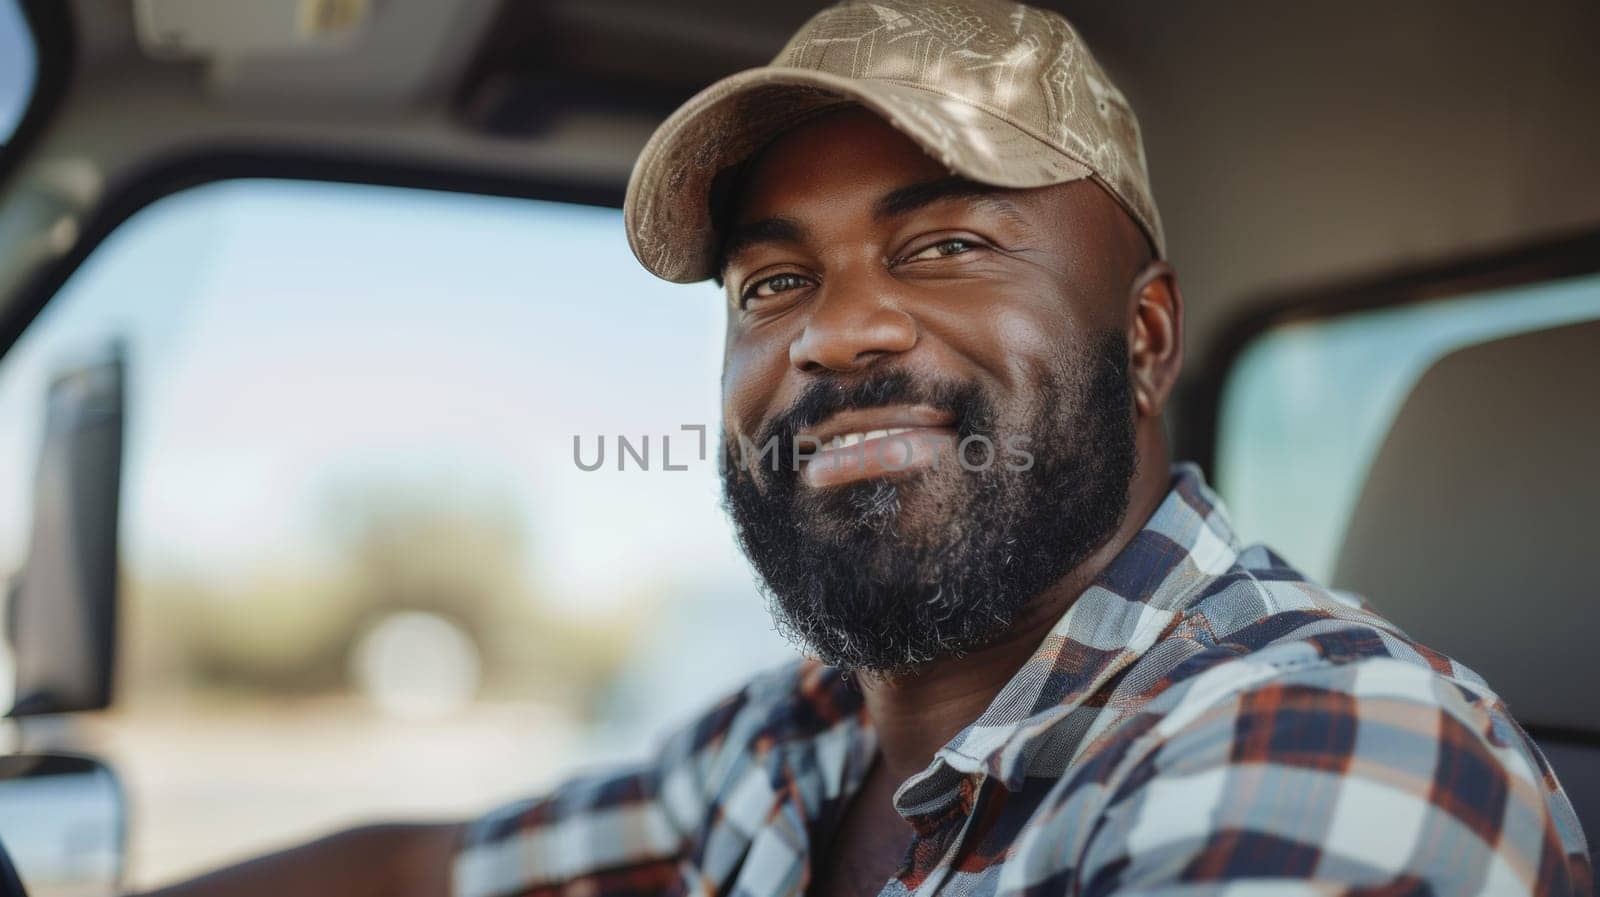 A man in a truck smiling and wearing a hat